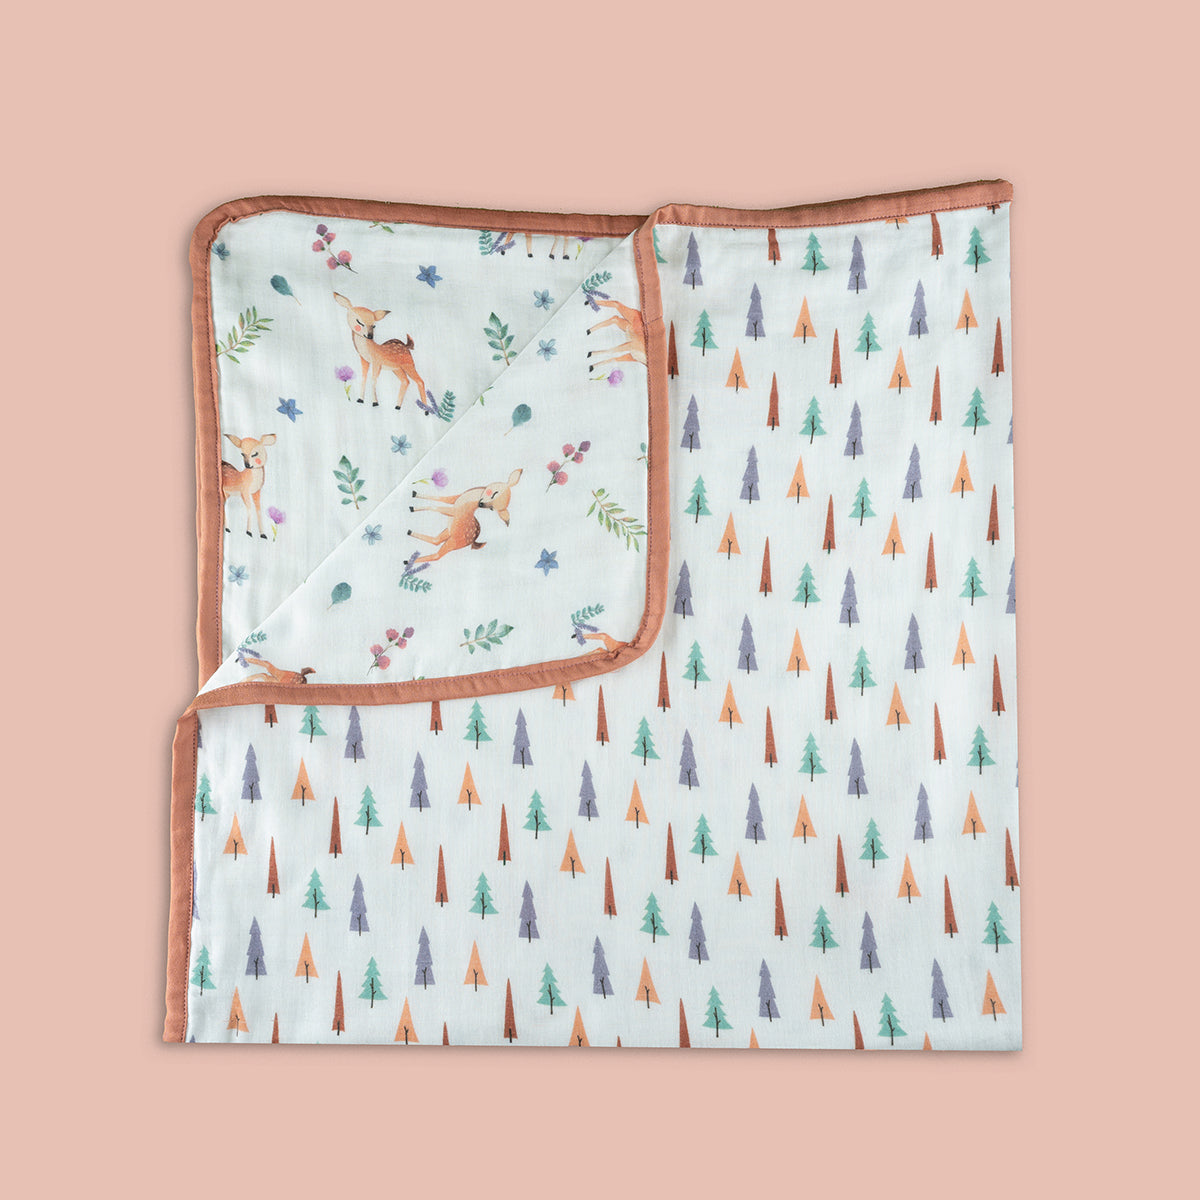 Tiny Snooze Mini Cot Bedding Set – Enchanted Forest